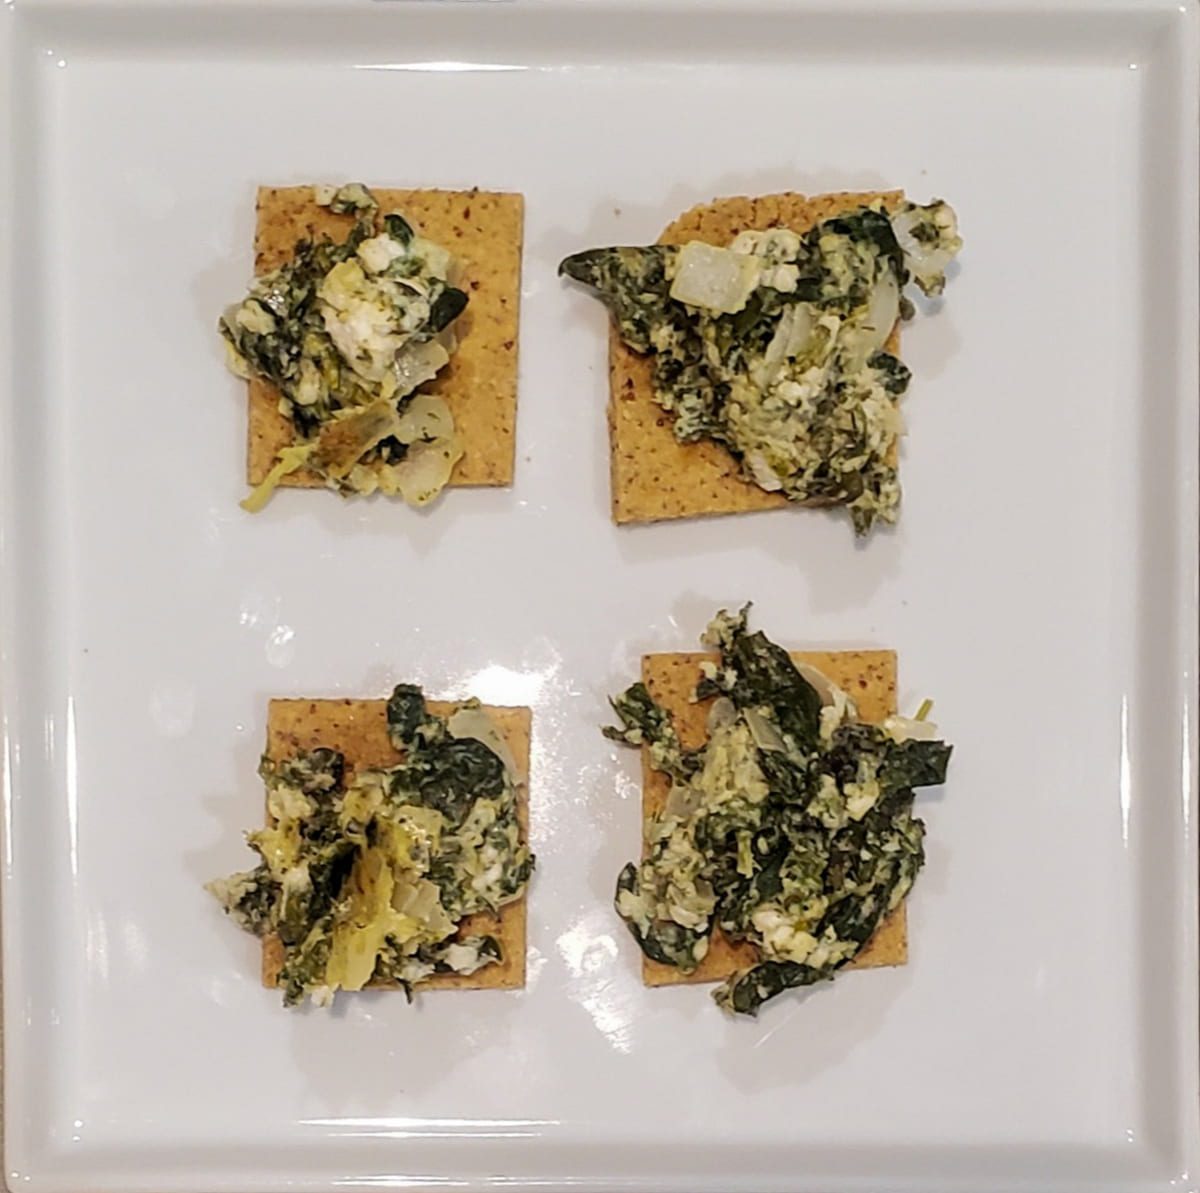 Simple spanakopita dip recipe on a gluten free cracker from cleveland cooking